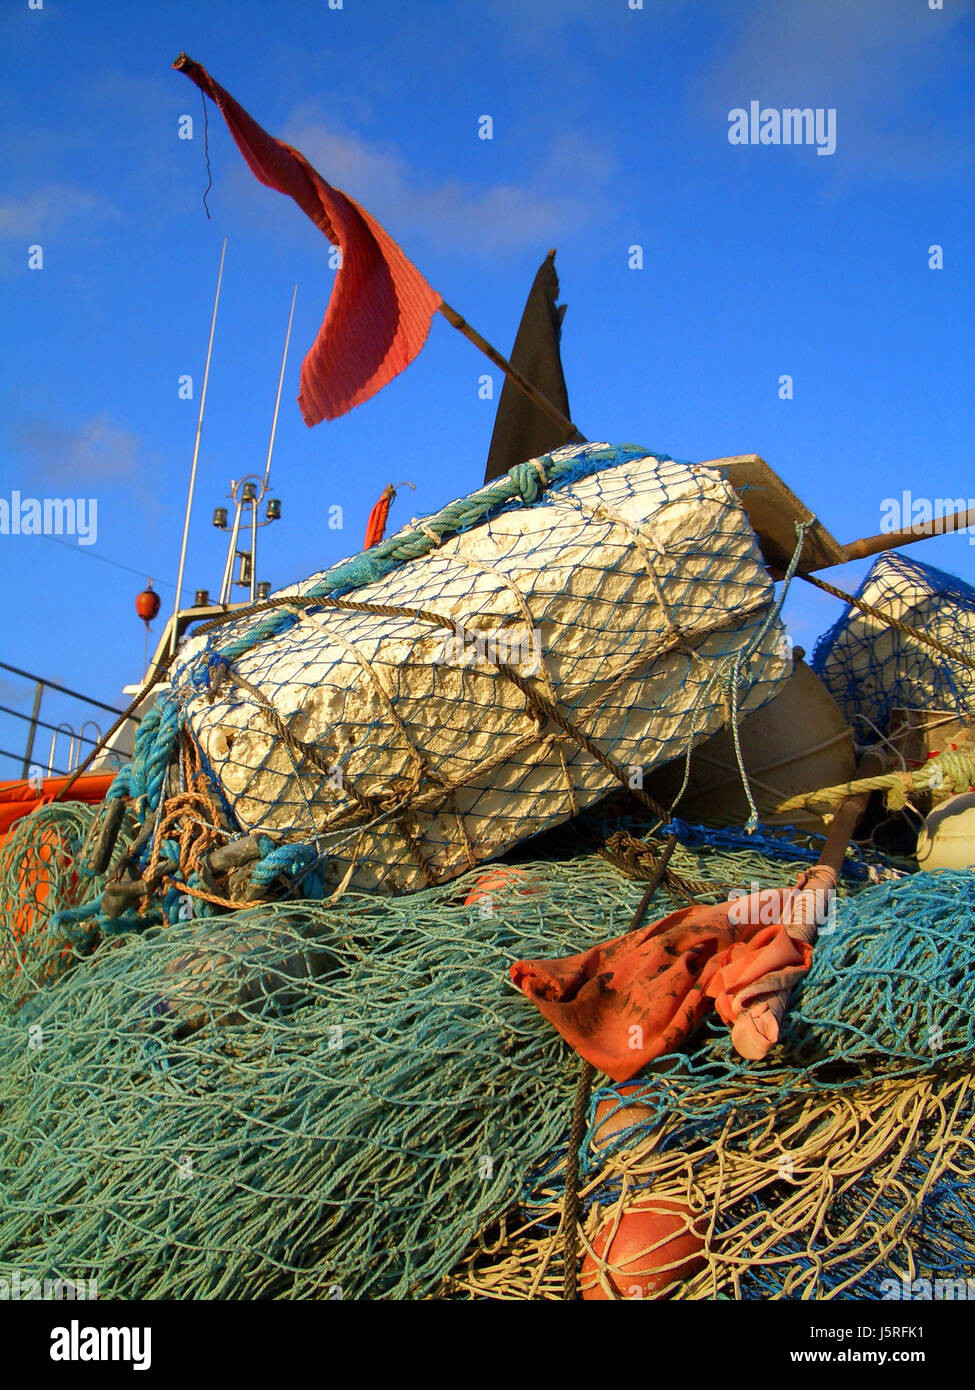 blue green chaos confusion mess net dew fishing fishery nets boost firmament Stock Photo